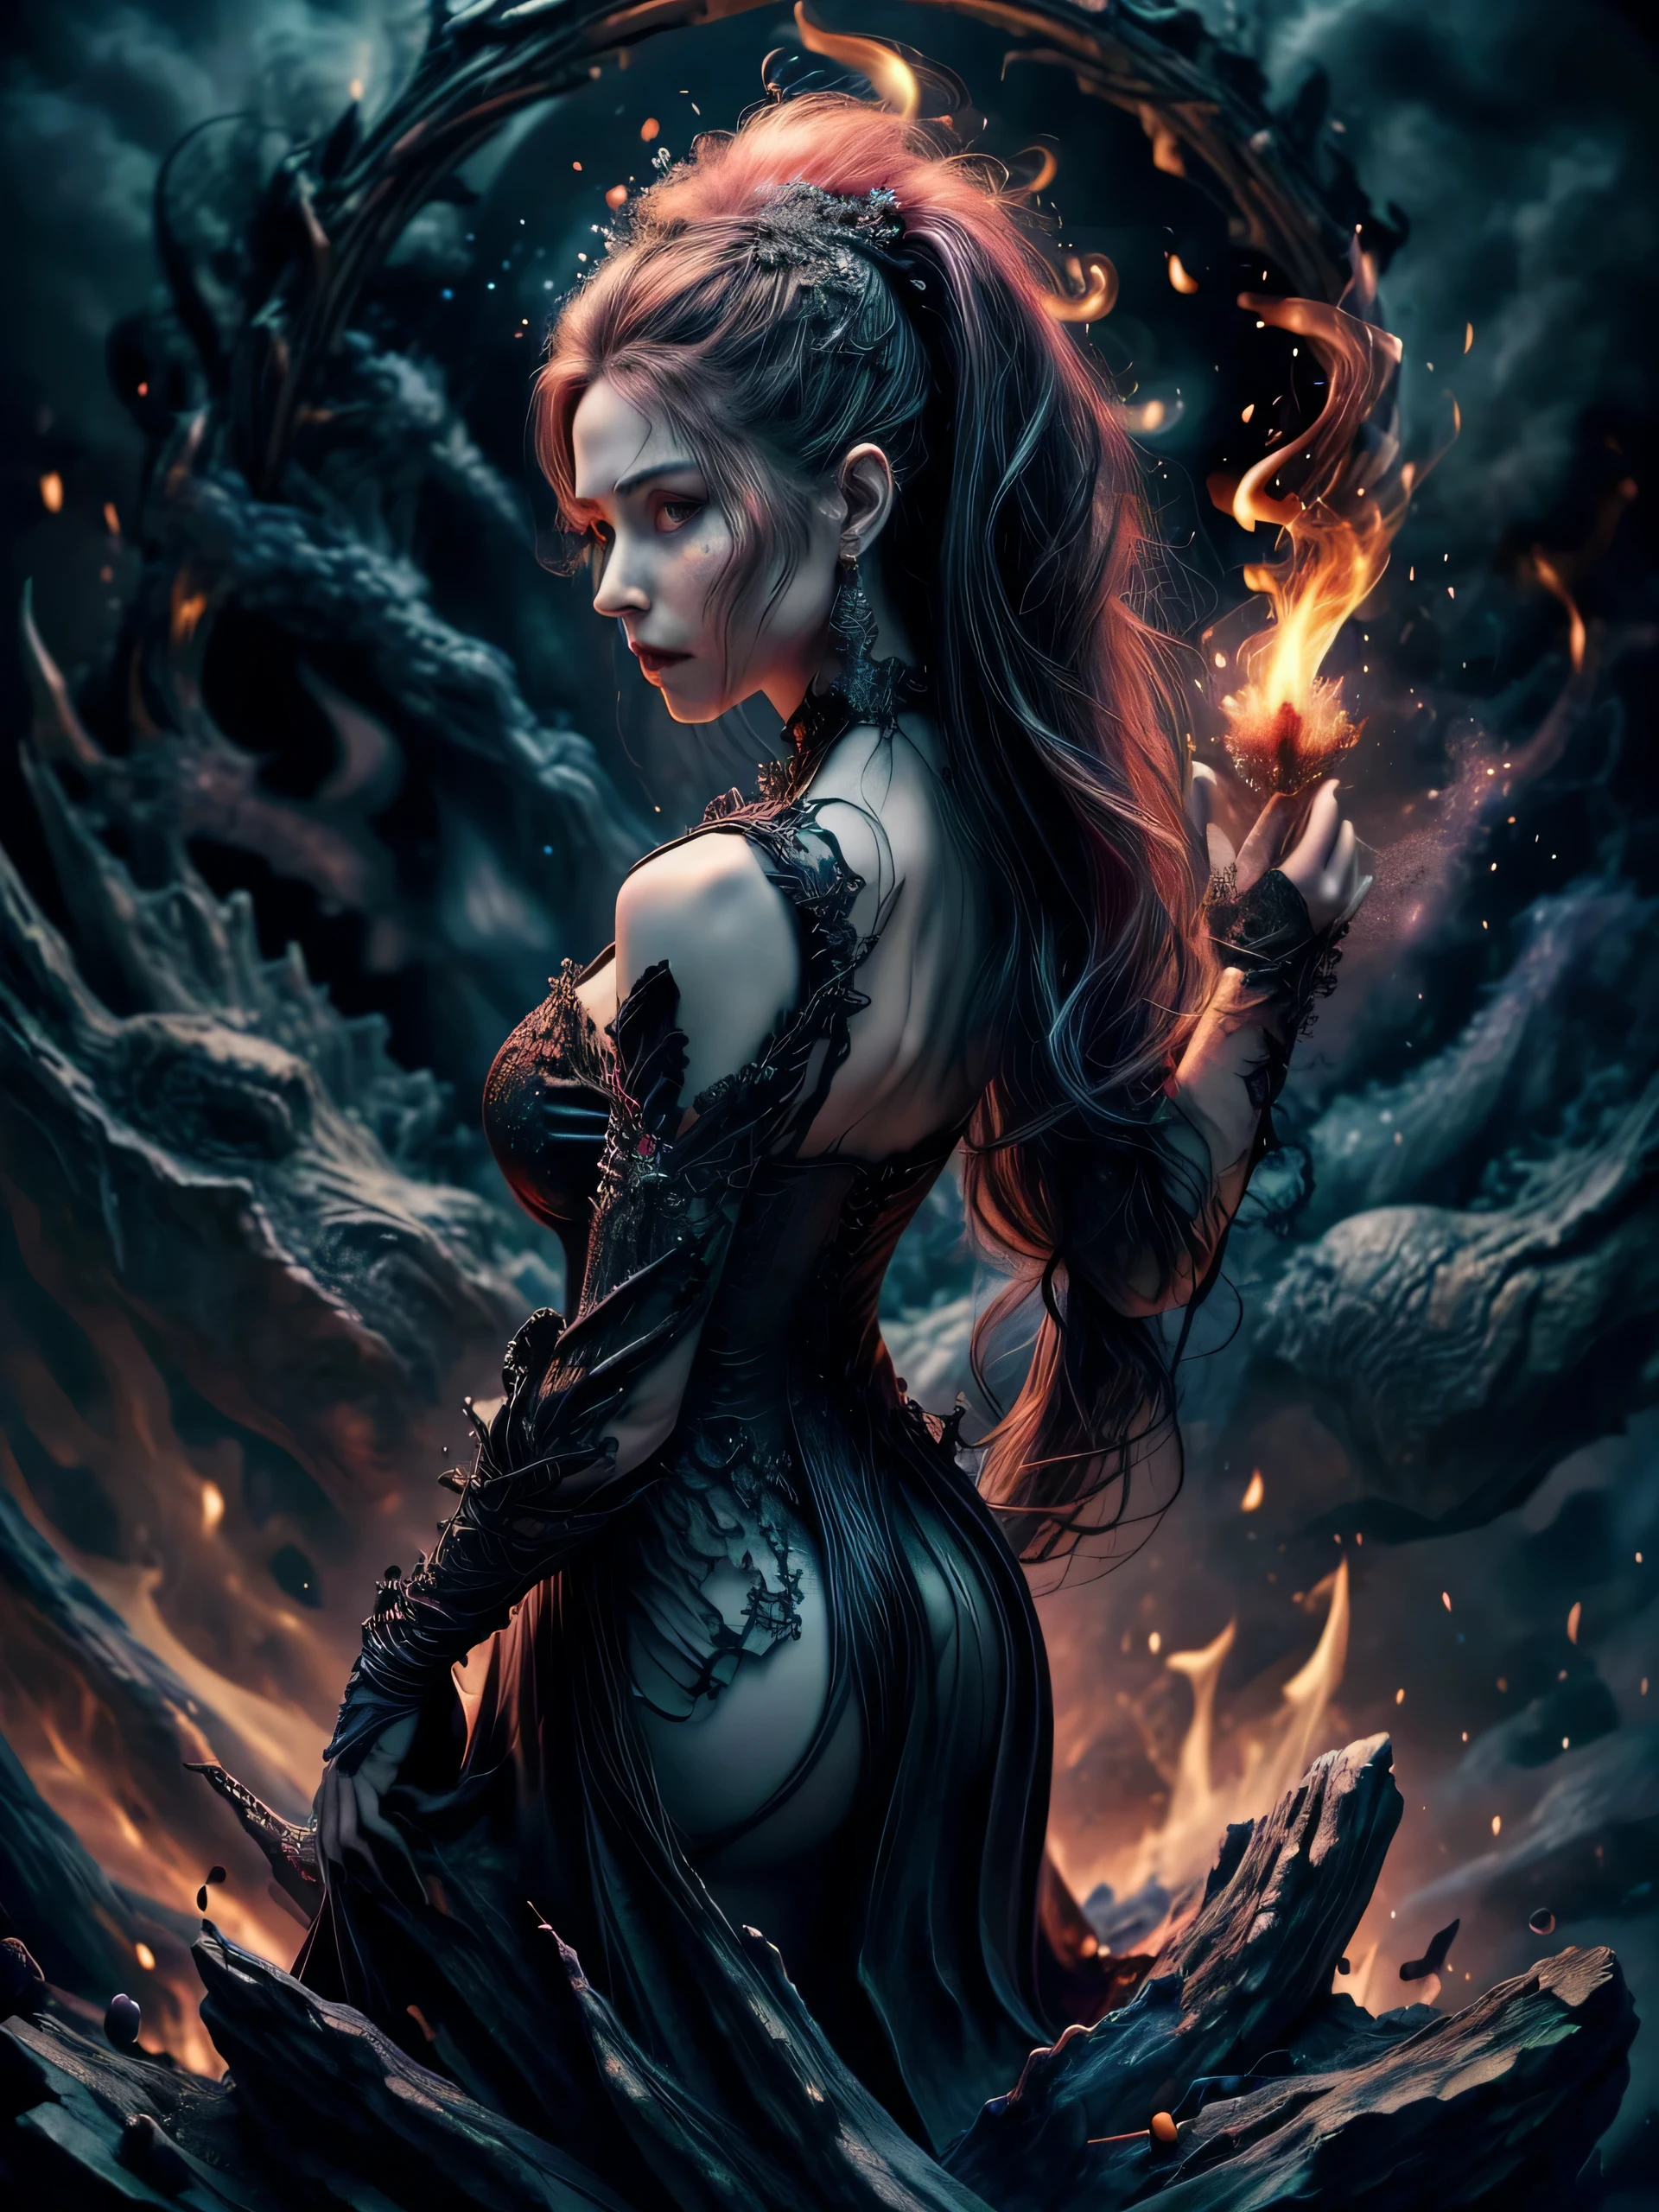 (Masterpiece, best quality, highres:1.3), from back, photorealistic, close-up, 1 goddess of flame, queen of demonic fire, from fantasy novel, feminine appearance, cleavage, detailed hair strands, delicate face, glowing red eyes, furious gaze, fully dressed in elegant gothic dress with fire effect, fire diadem, immense fire spell, fire storm, flame spark, fire realm, ((surrealistic detail))